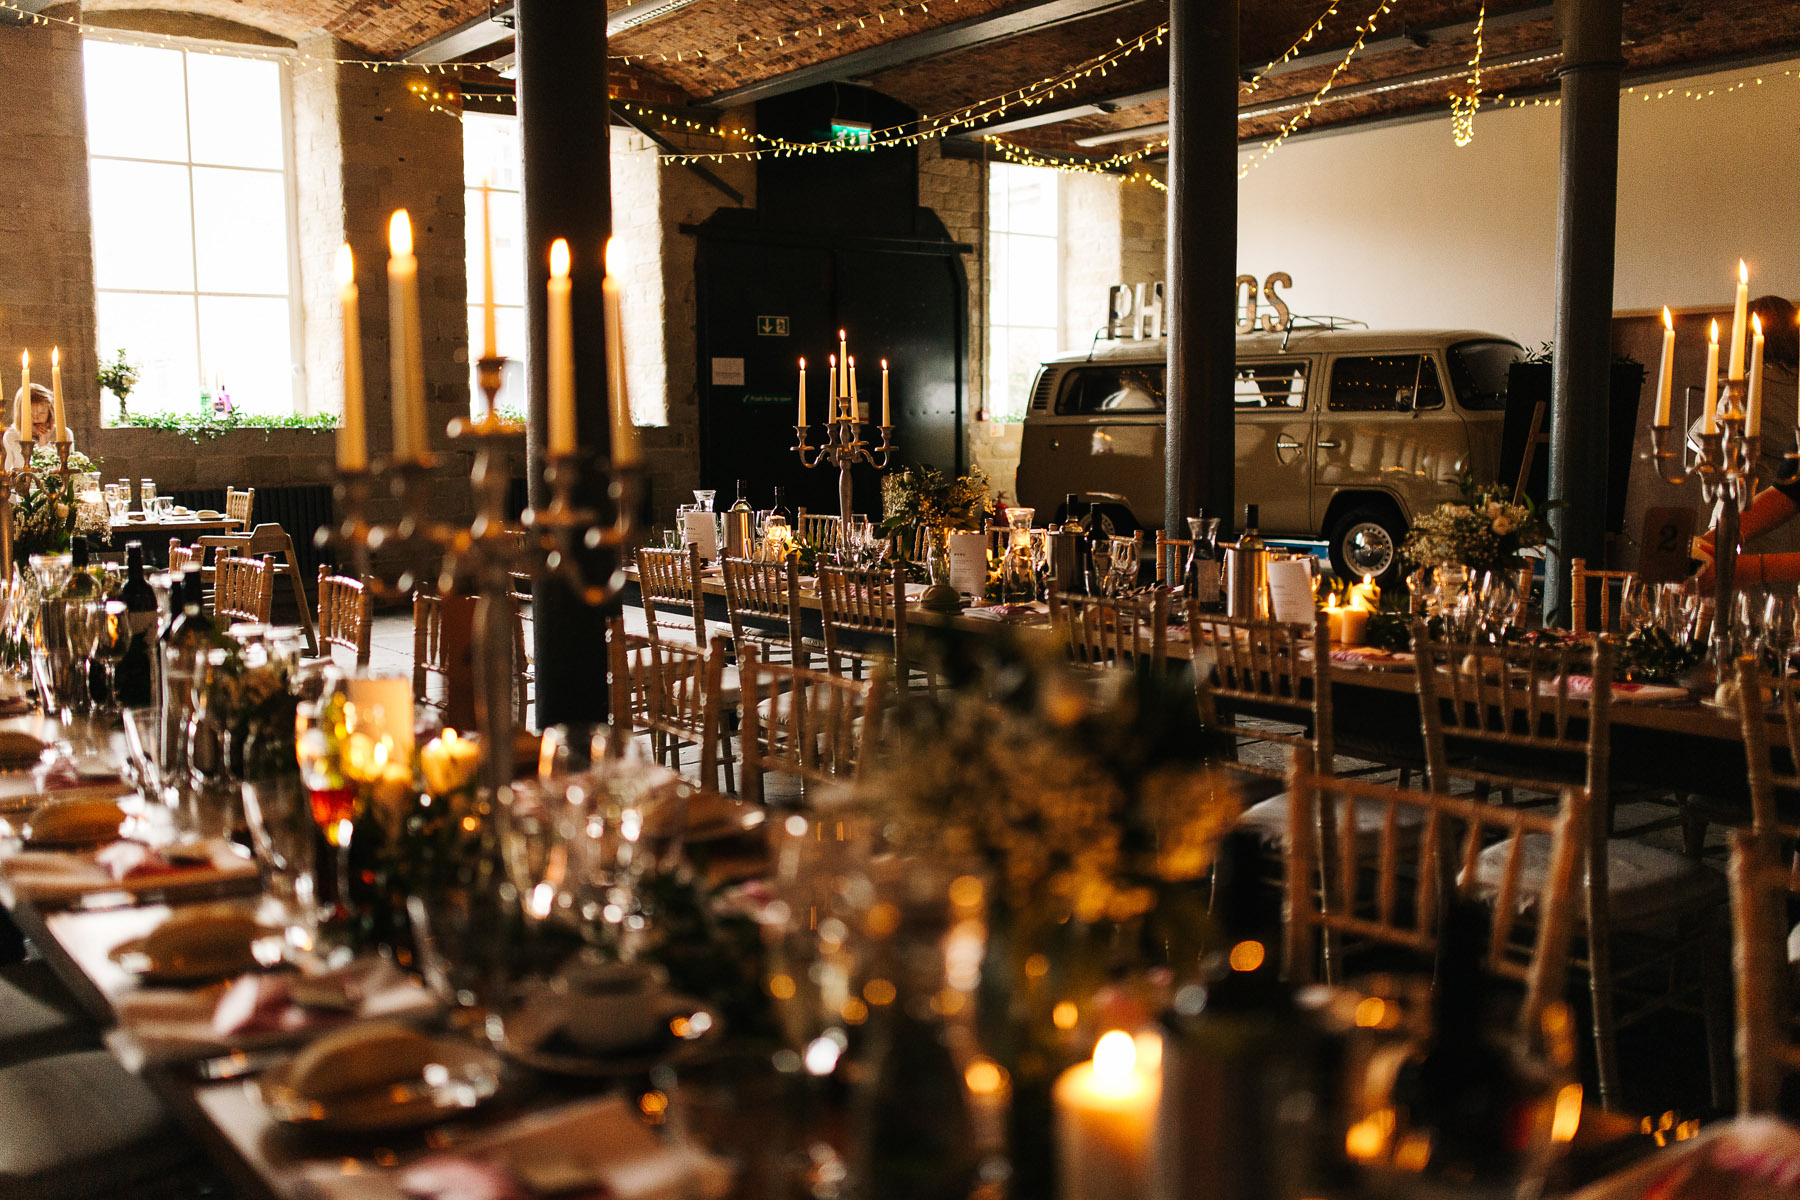 Industrail wedding Styling at Dean Clough Mills 